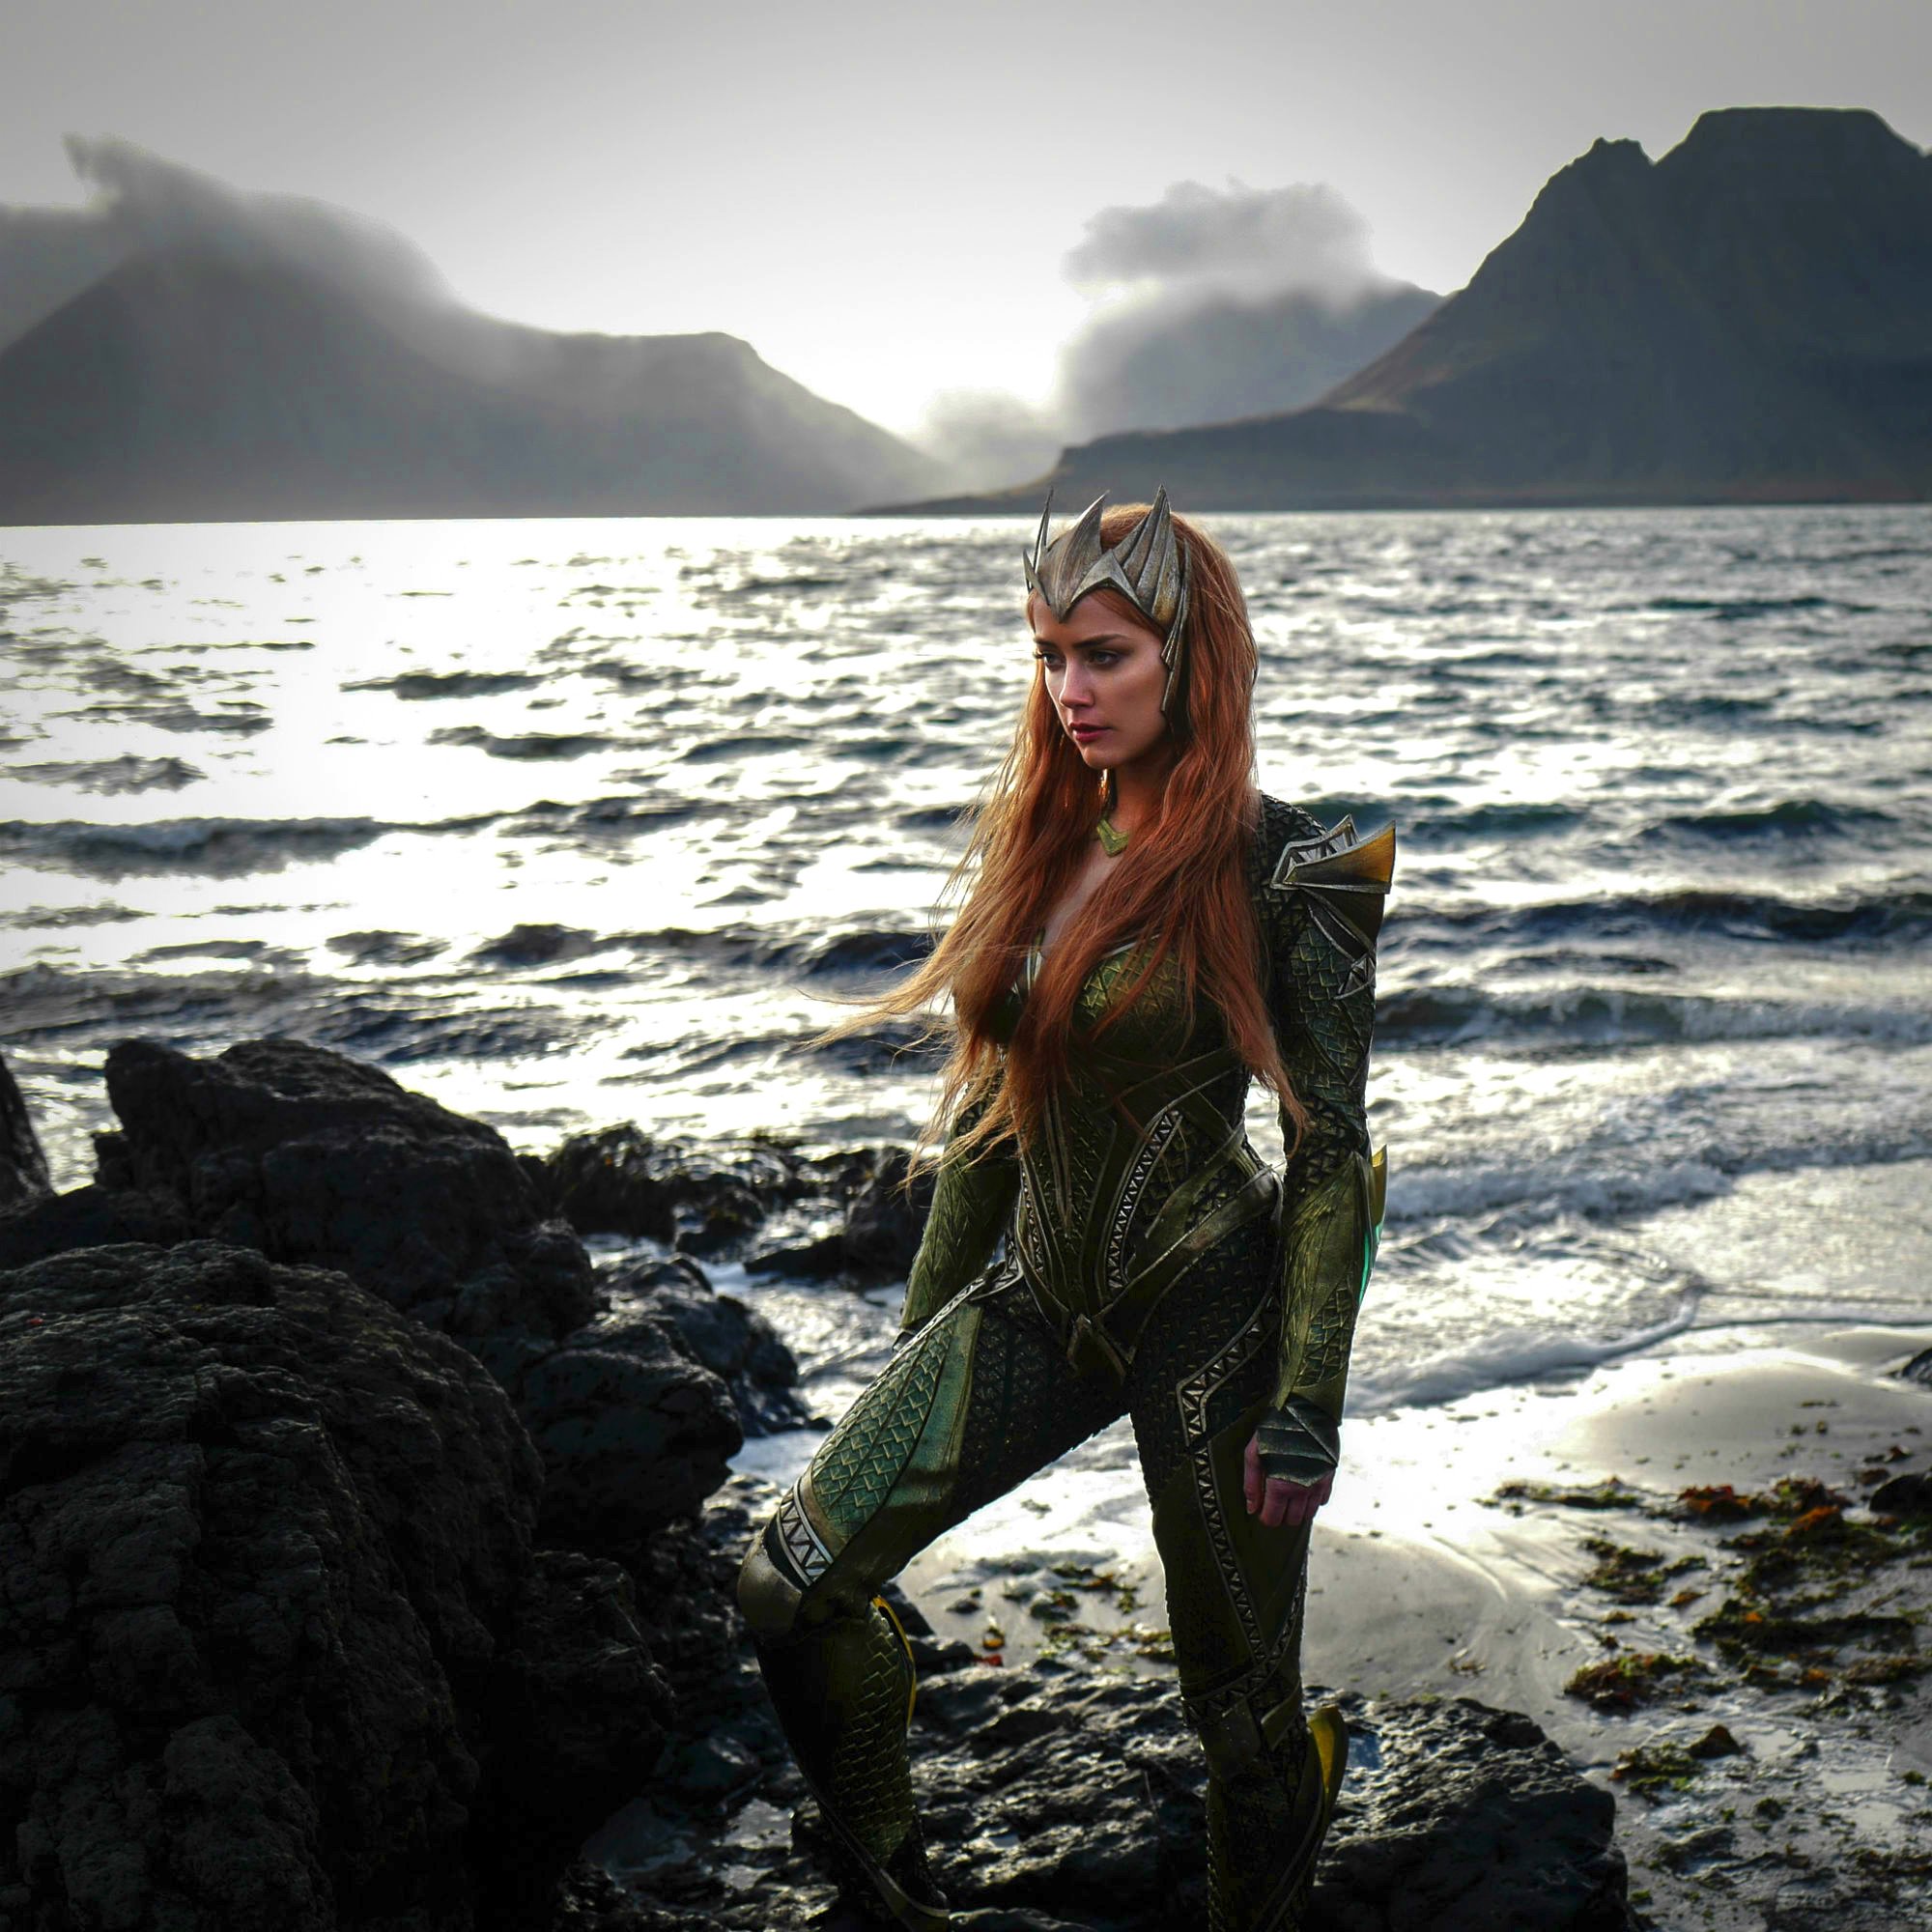 A Happy Birthday to our Queen Mera--Amber Heard! 